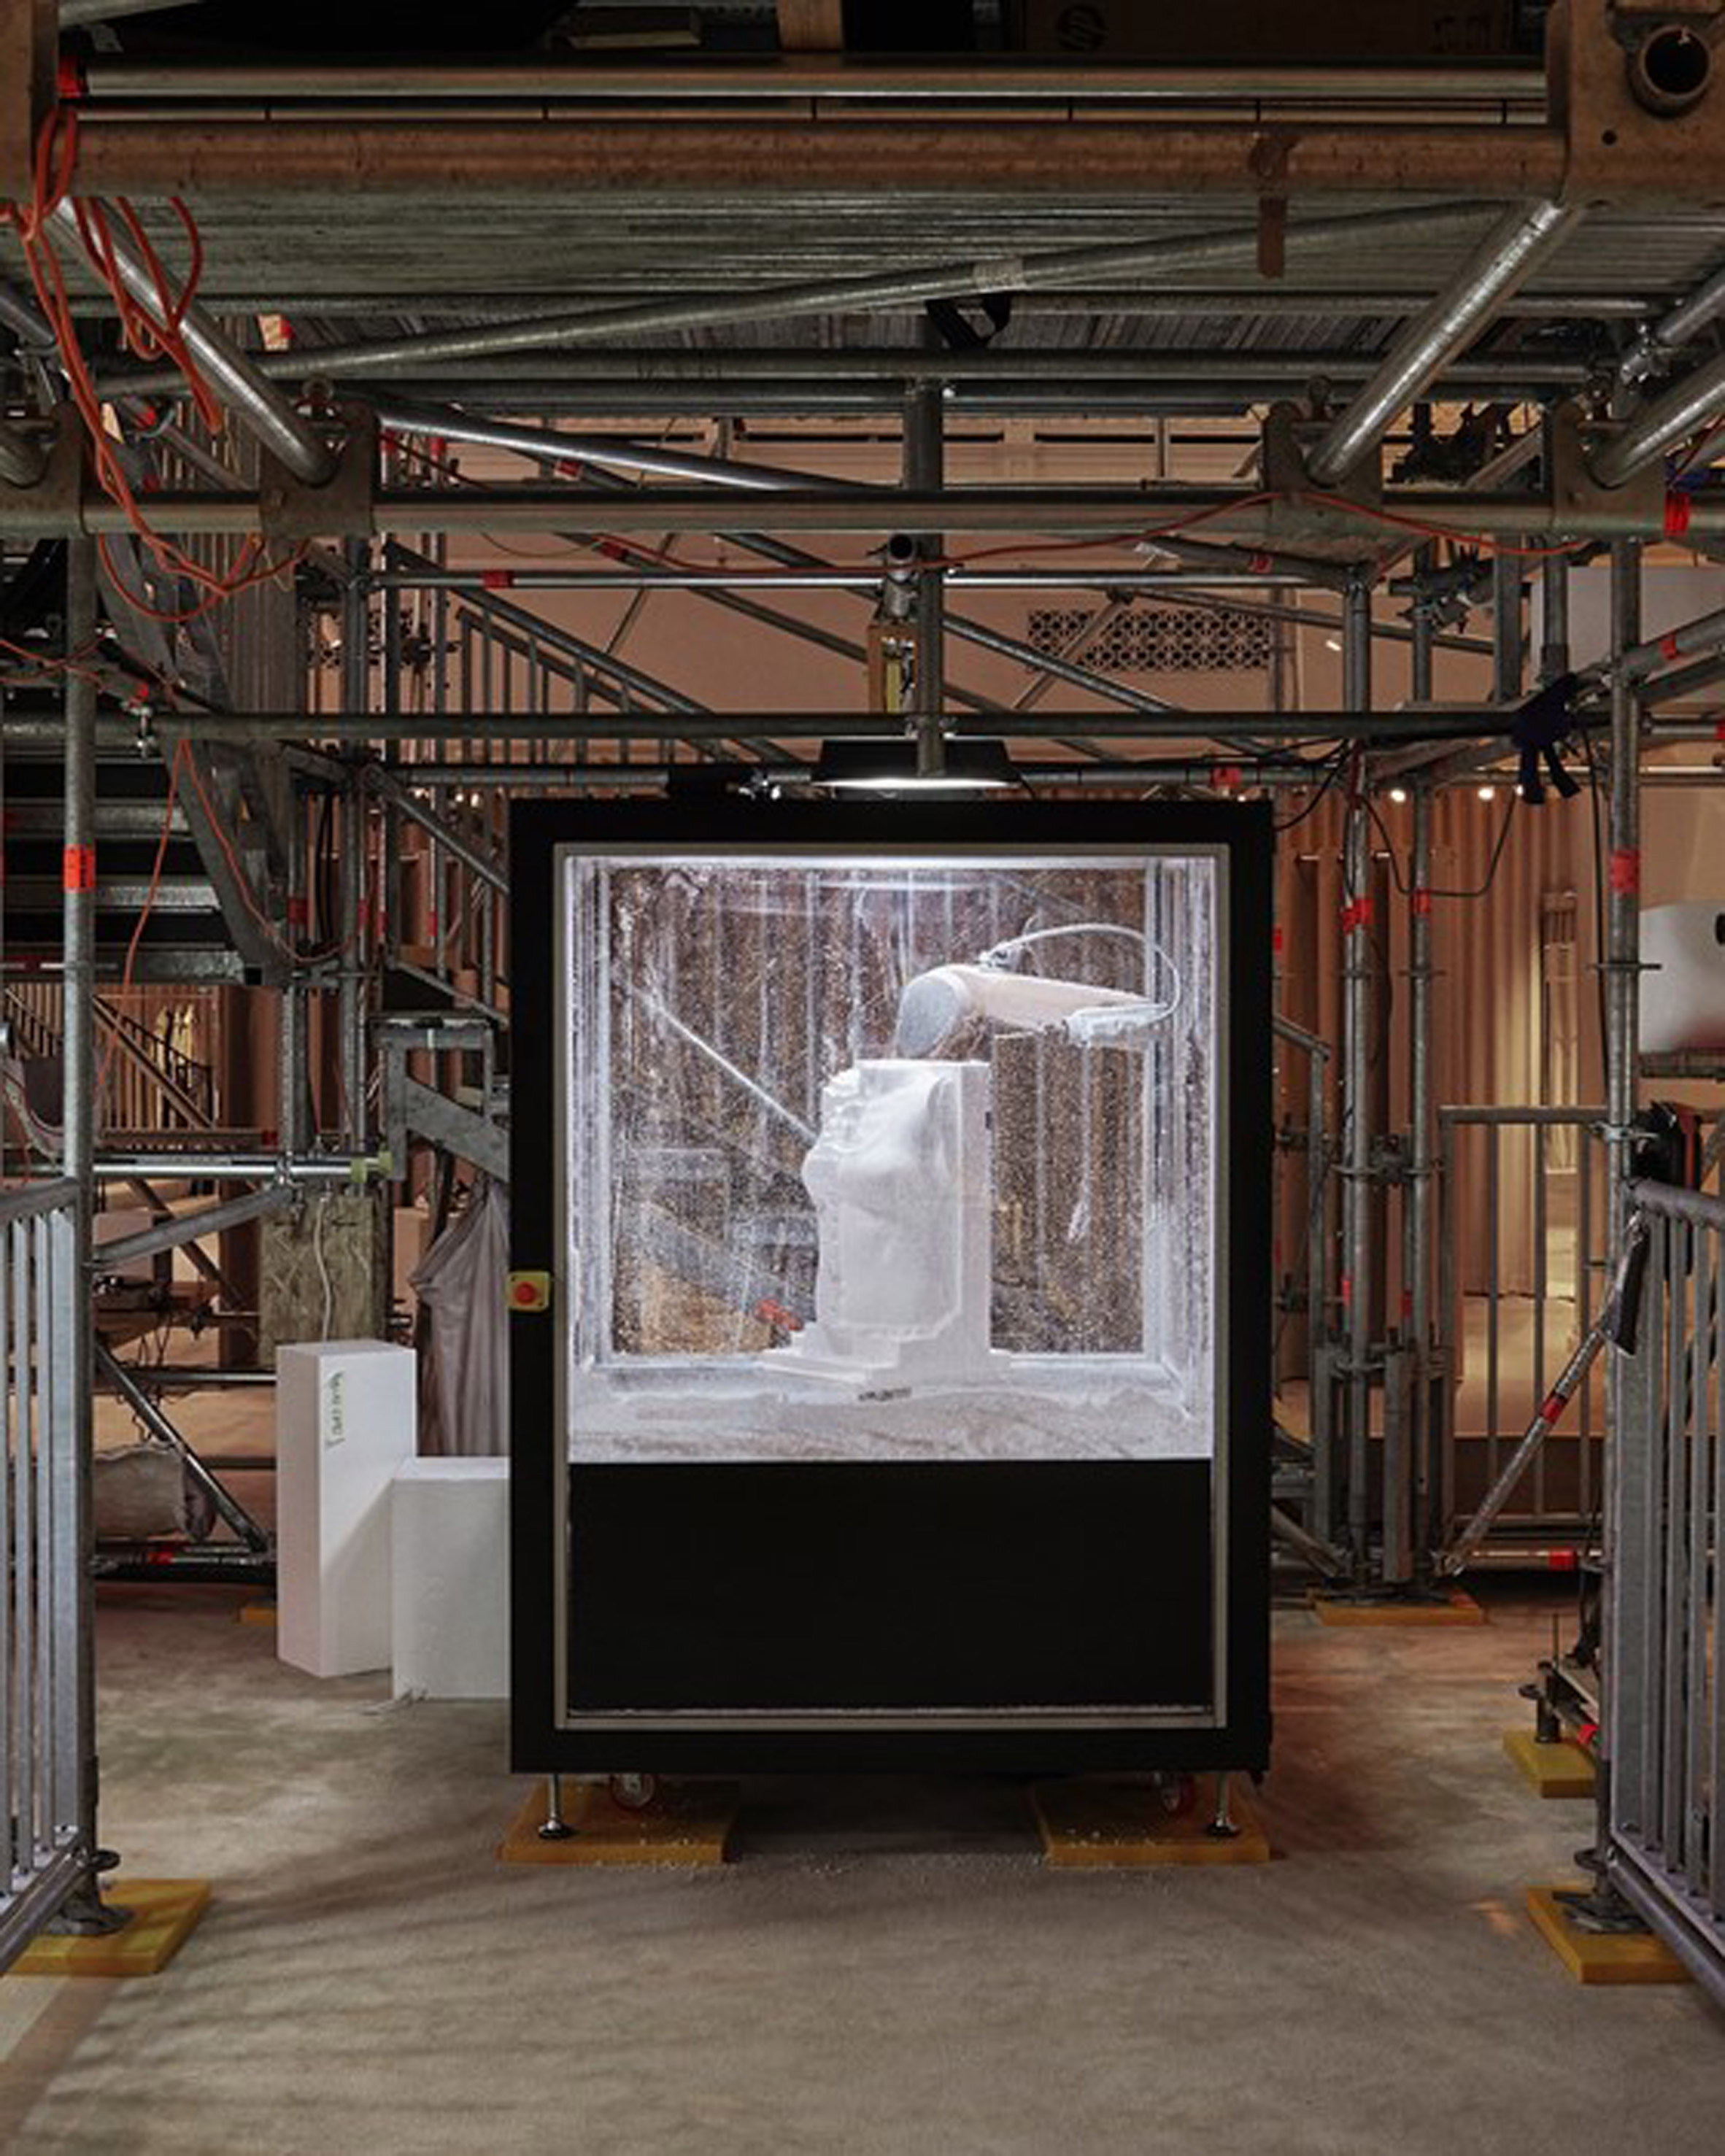 Robot produces polystyrene sculptures inside Burberry's London store